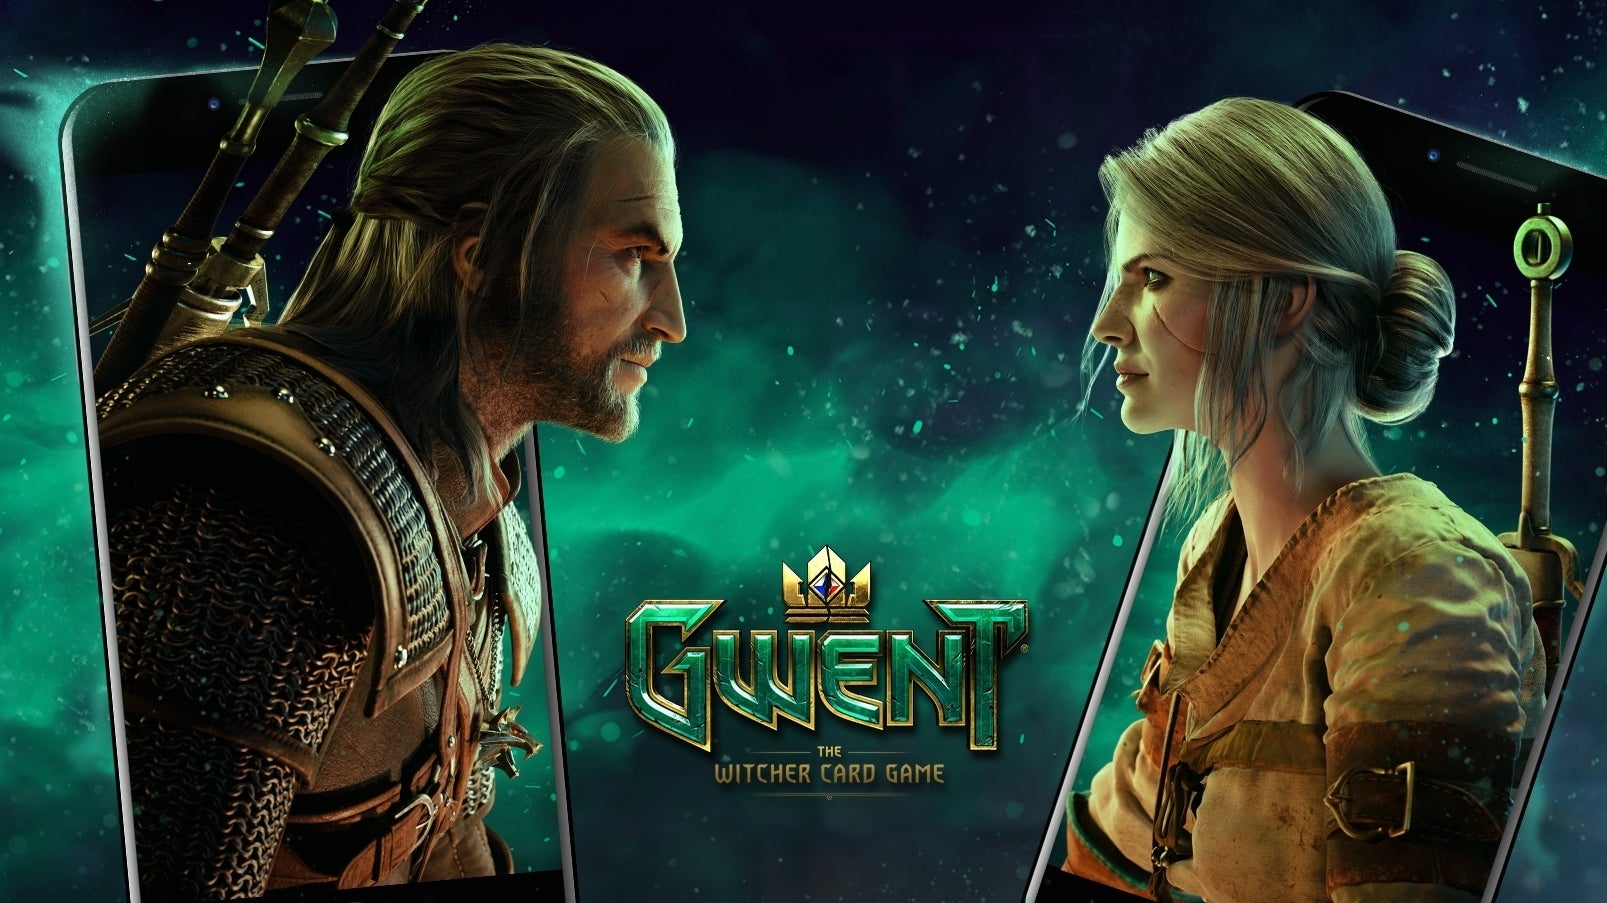 Image for The Witcher card game Gwent is coming to iOS